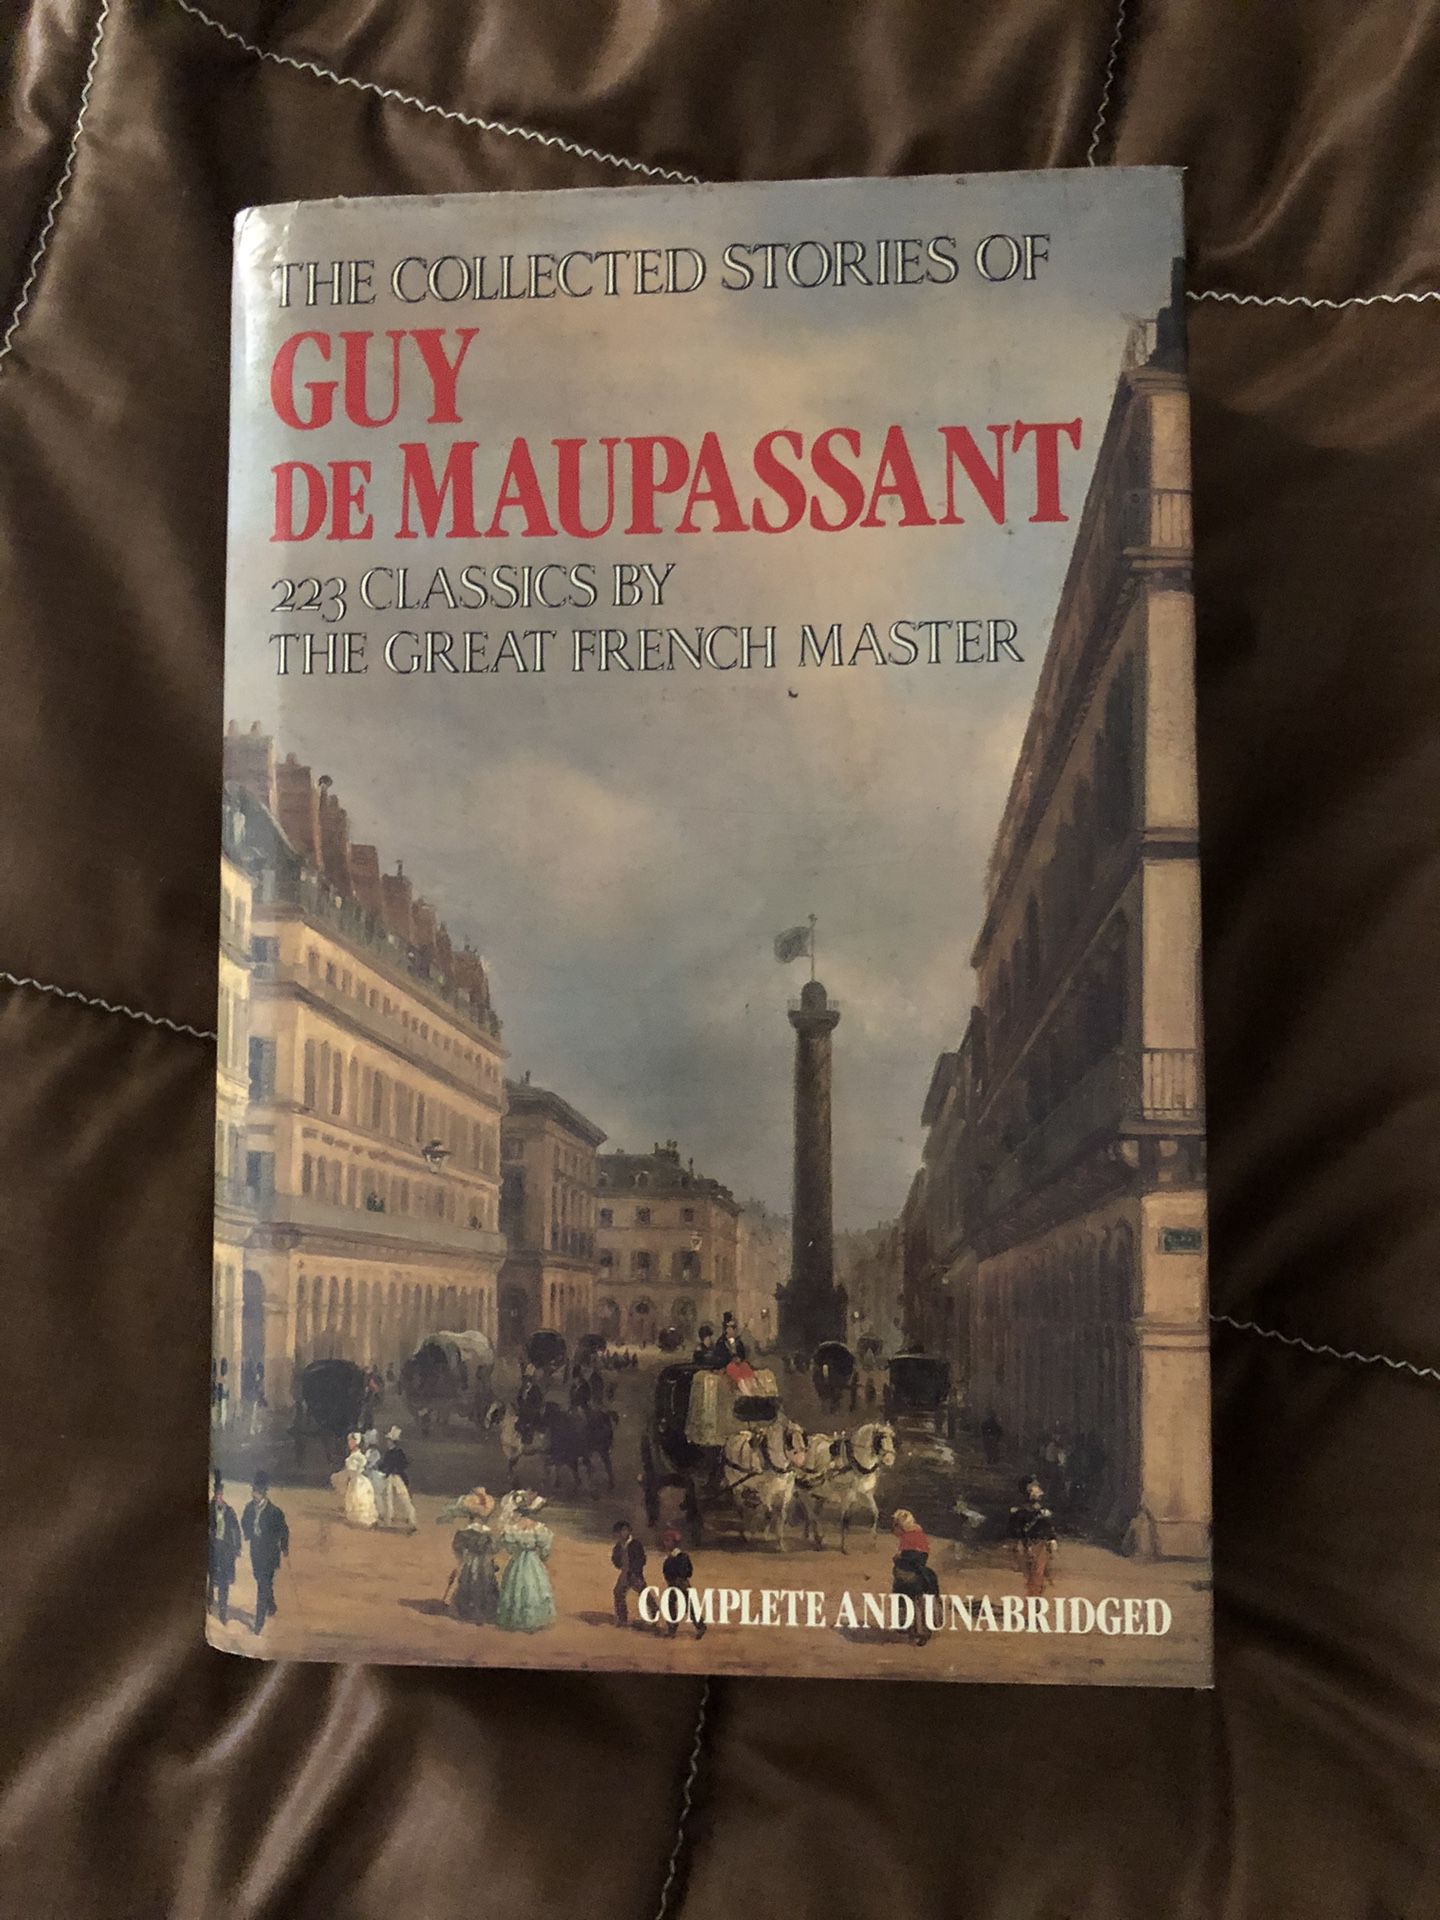 The Collected Stories of Guy de Maupassant (hardcover)